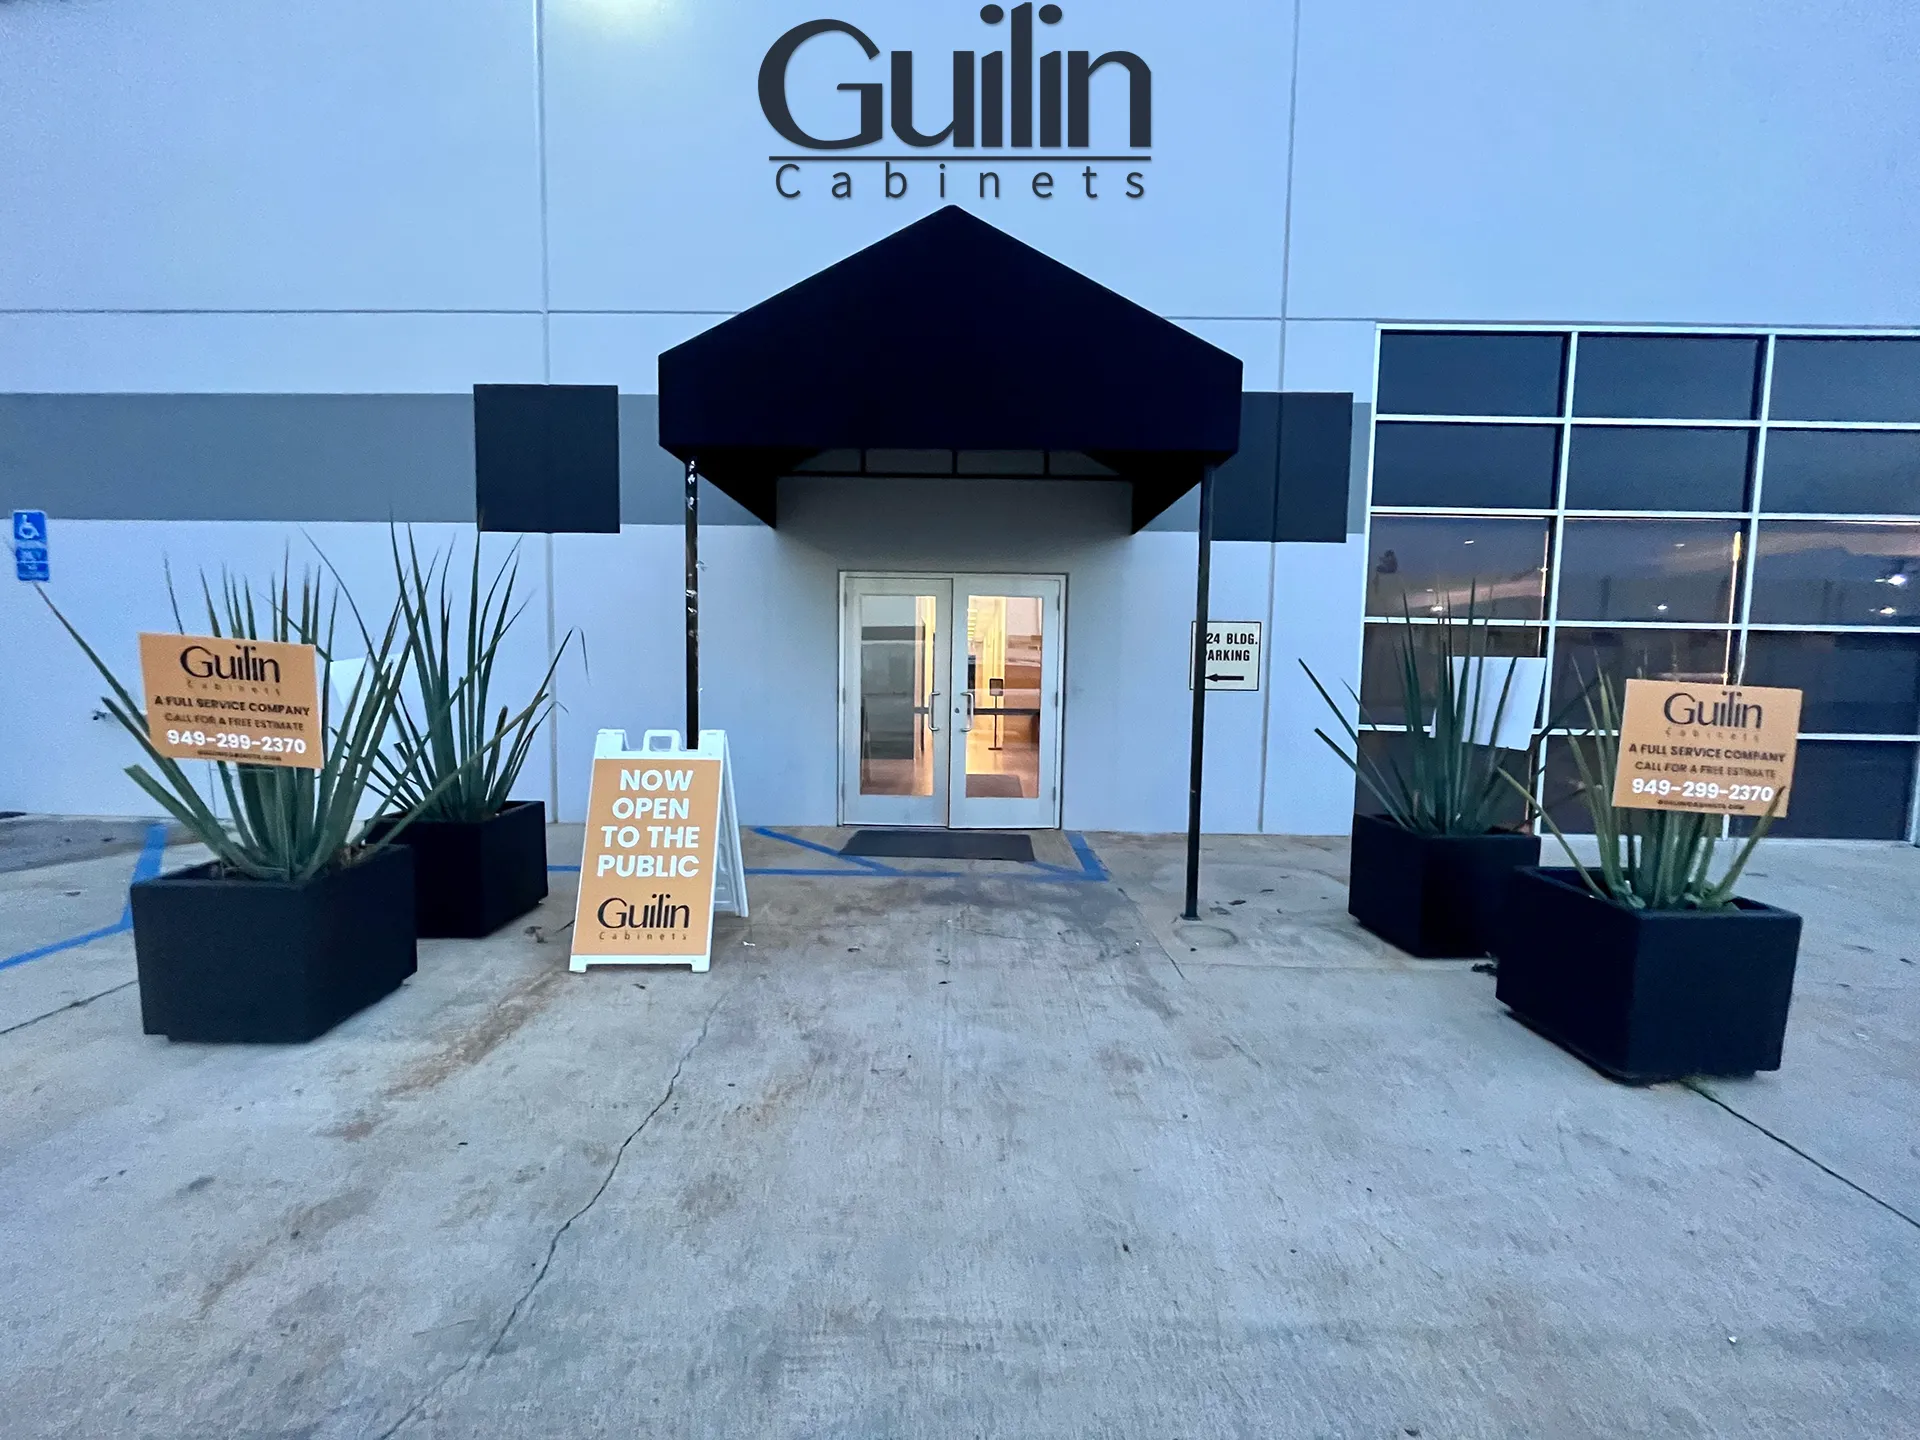 Our showroom, located at 1924 Barranca Pkwy in Irvine, is open for walk-in and scheduled visits.